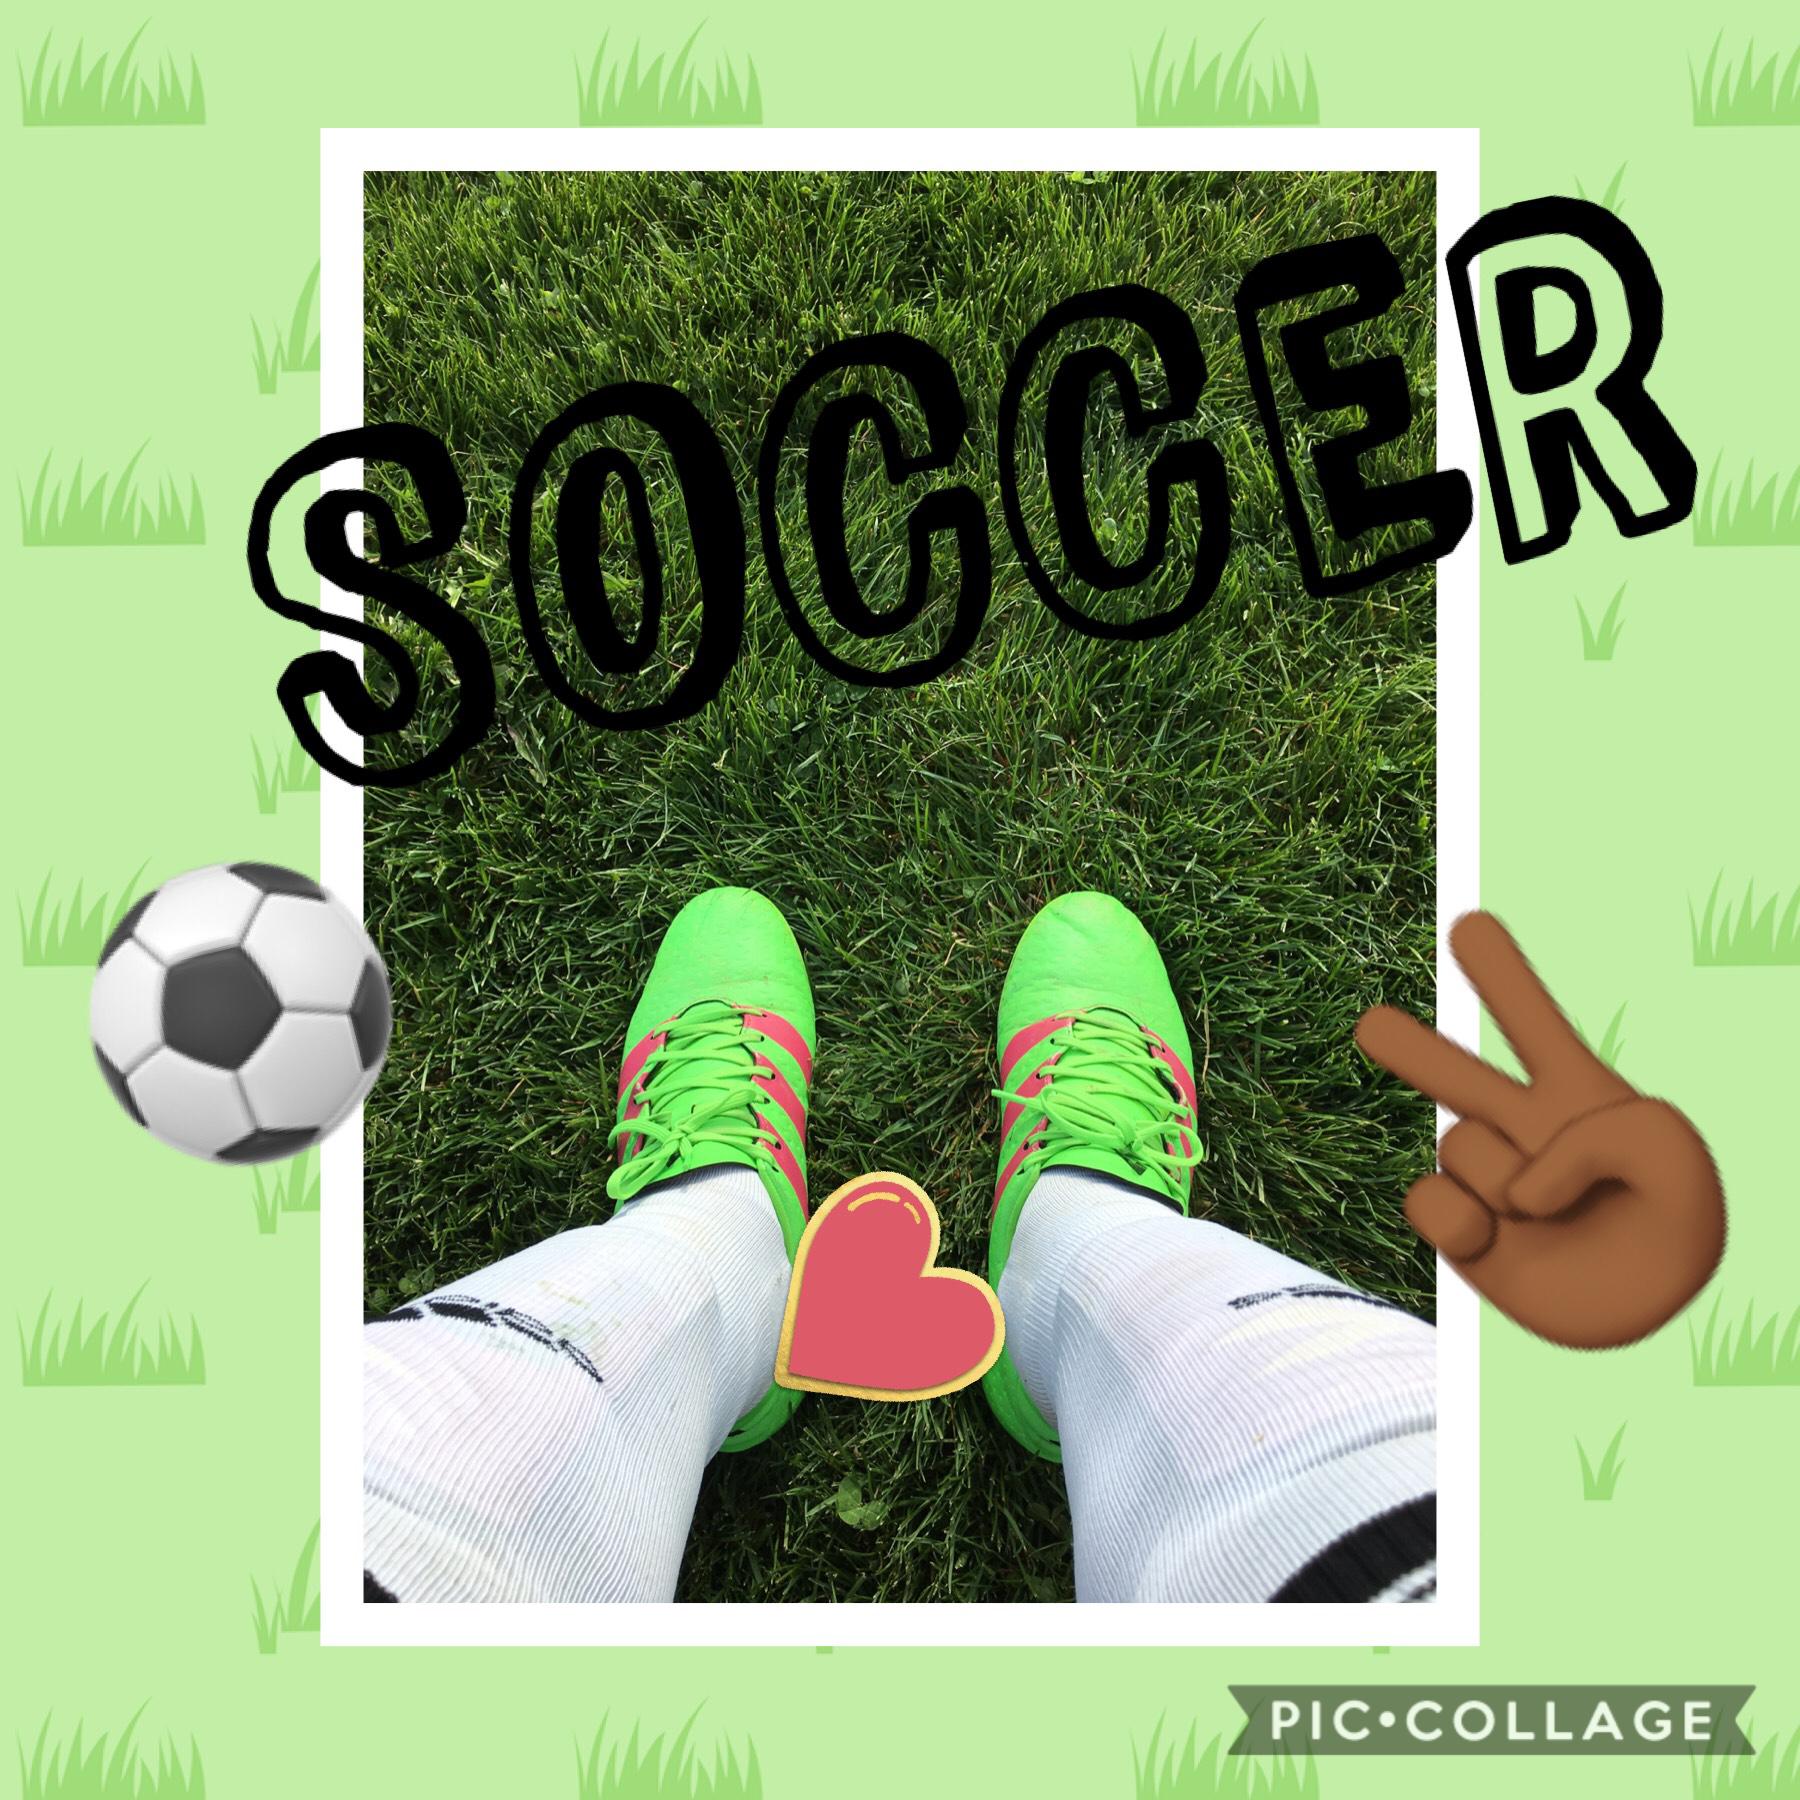 Tap 
I love soccer!! Going to play today